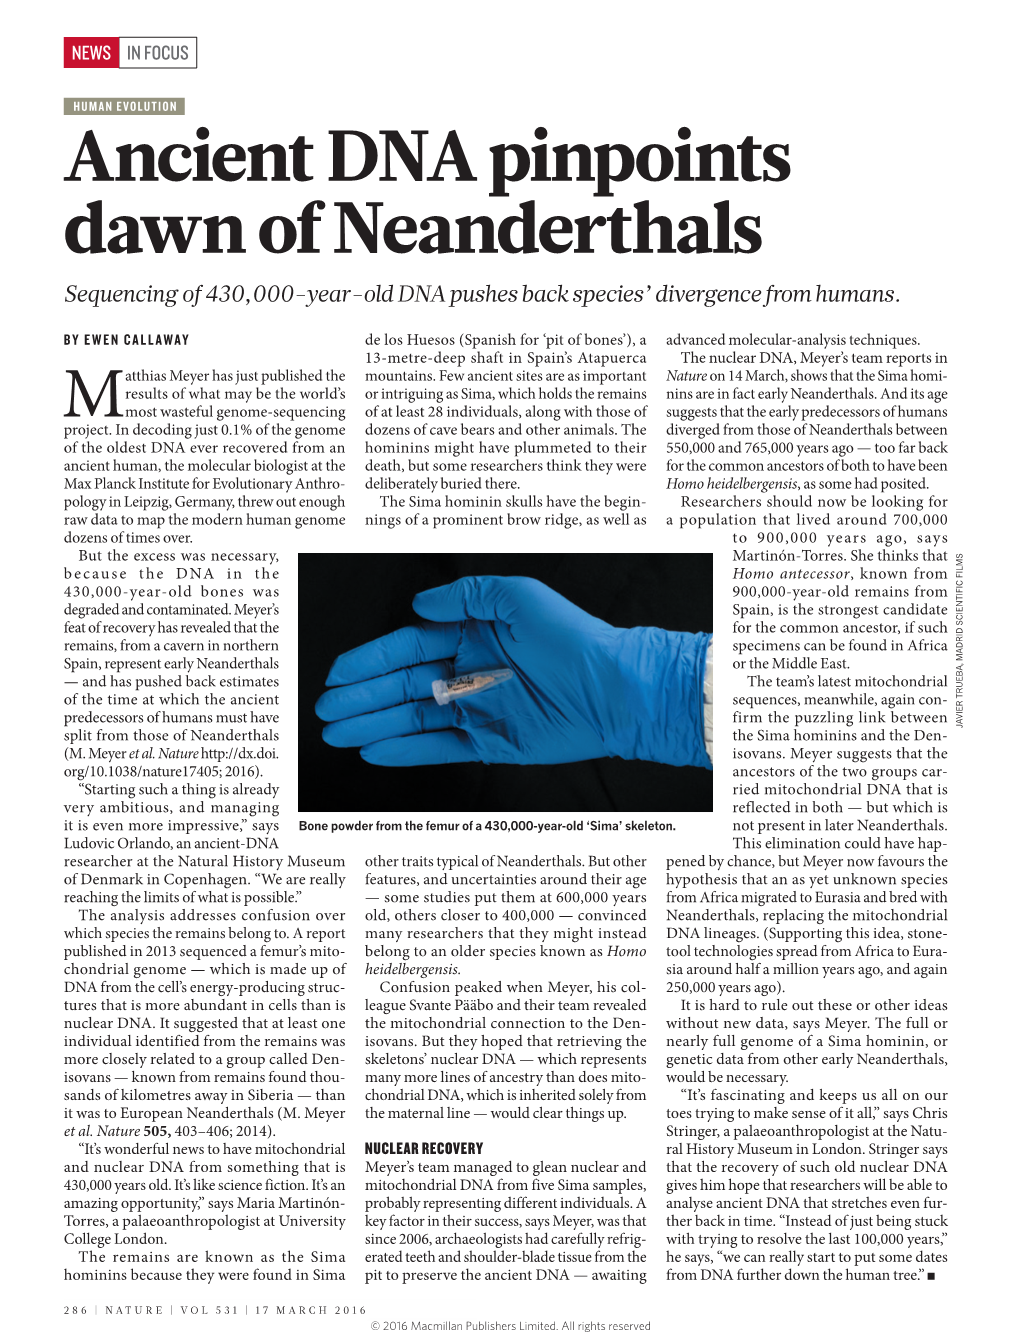 Ancient DNA Pinpoints Dawn of Neanderthals Sequencing of 430,000-Year-Old DNA Pushes Back Species’ Divergence from Humans